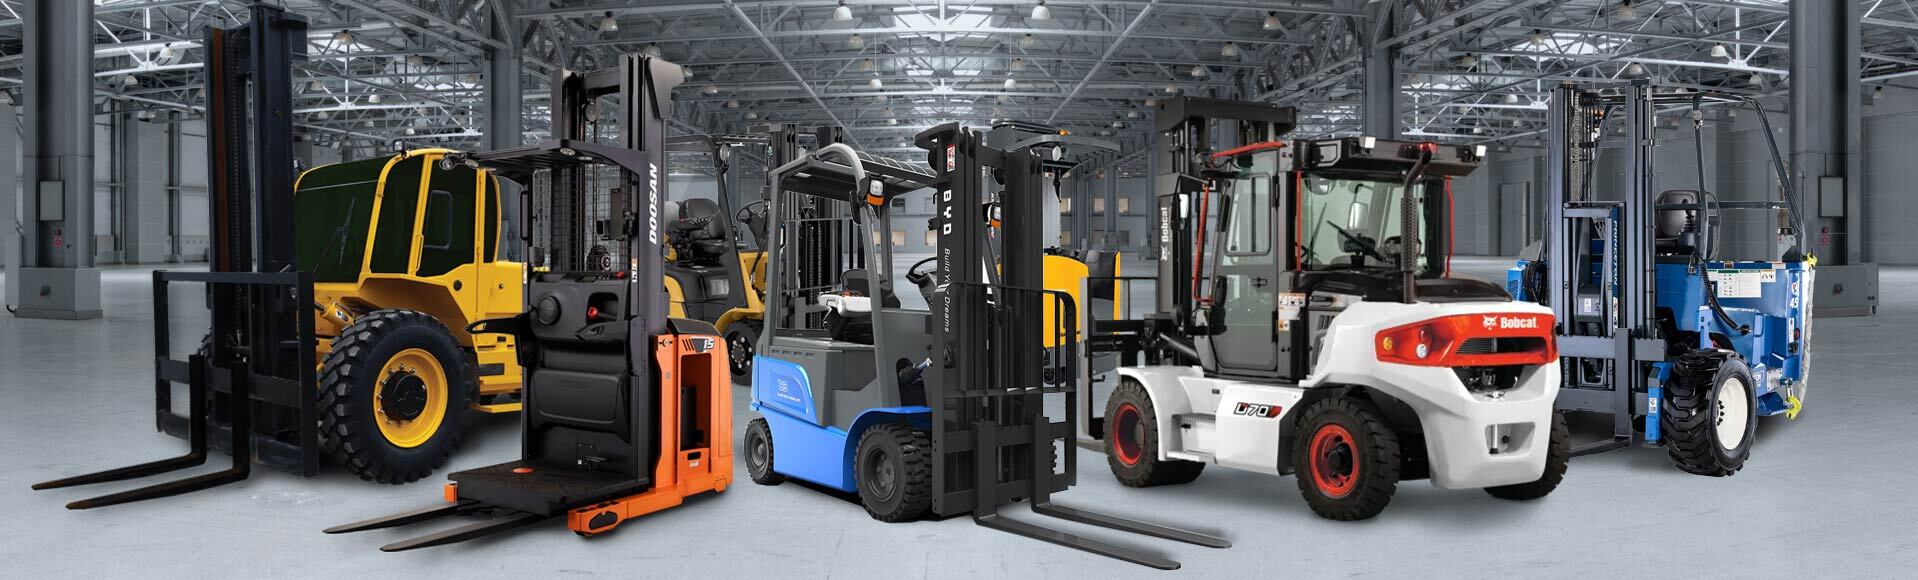 Forklifts For Sale Rent And Service In Cromer Material Handling